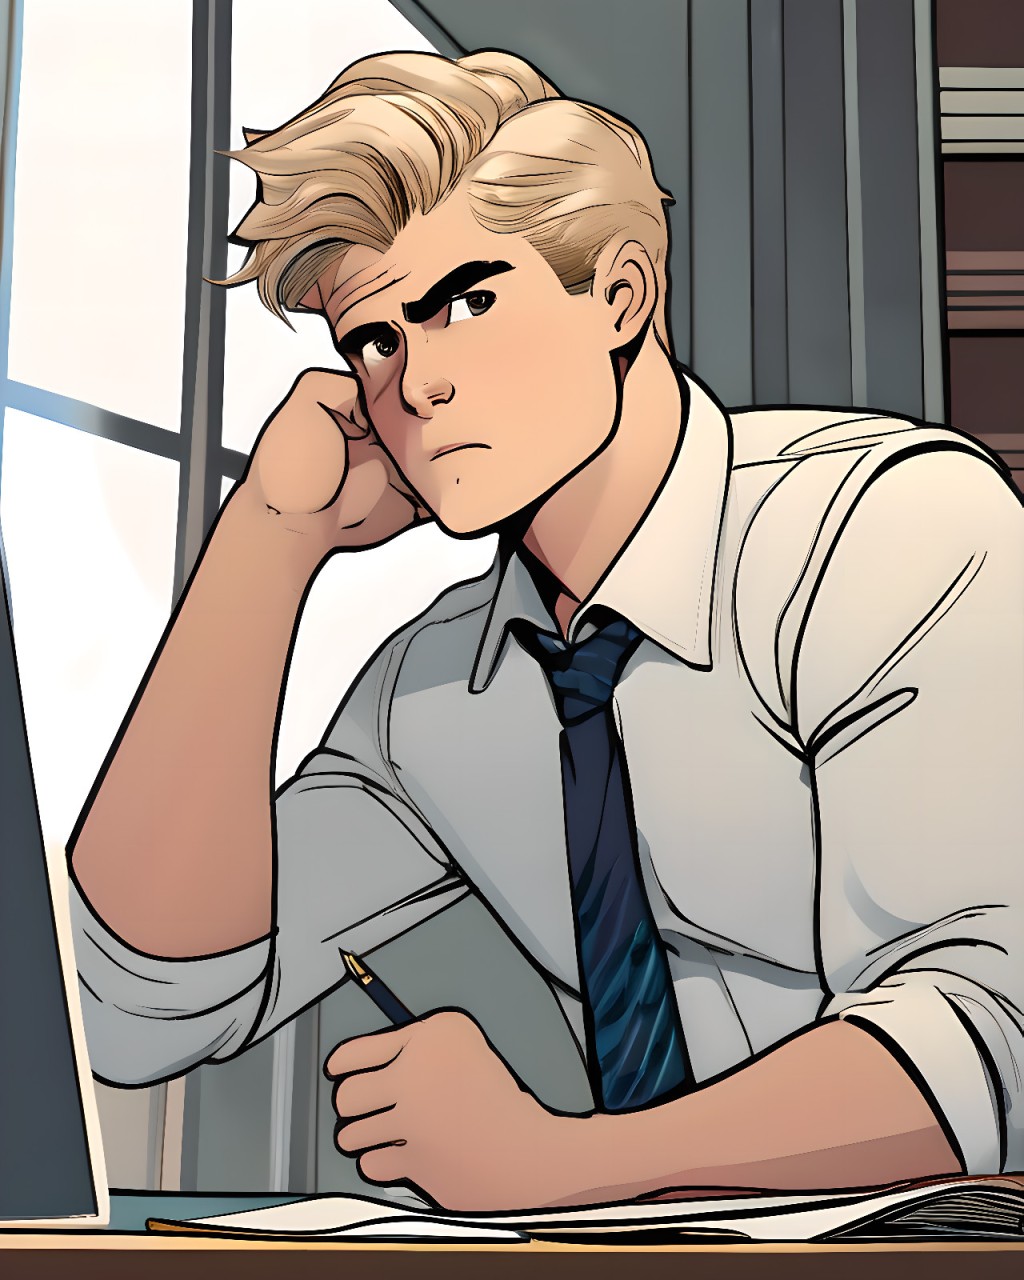 Cartoon man with blond hair wearing dress shirt and tie, looking displeased about something